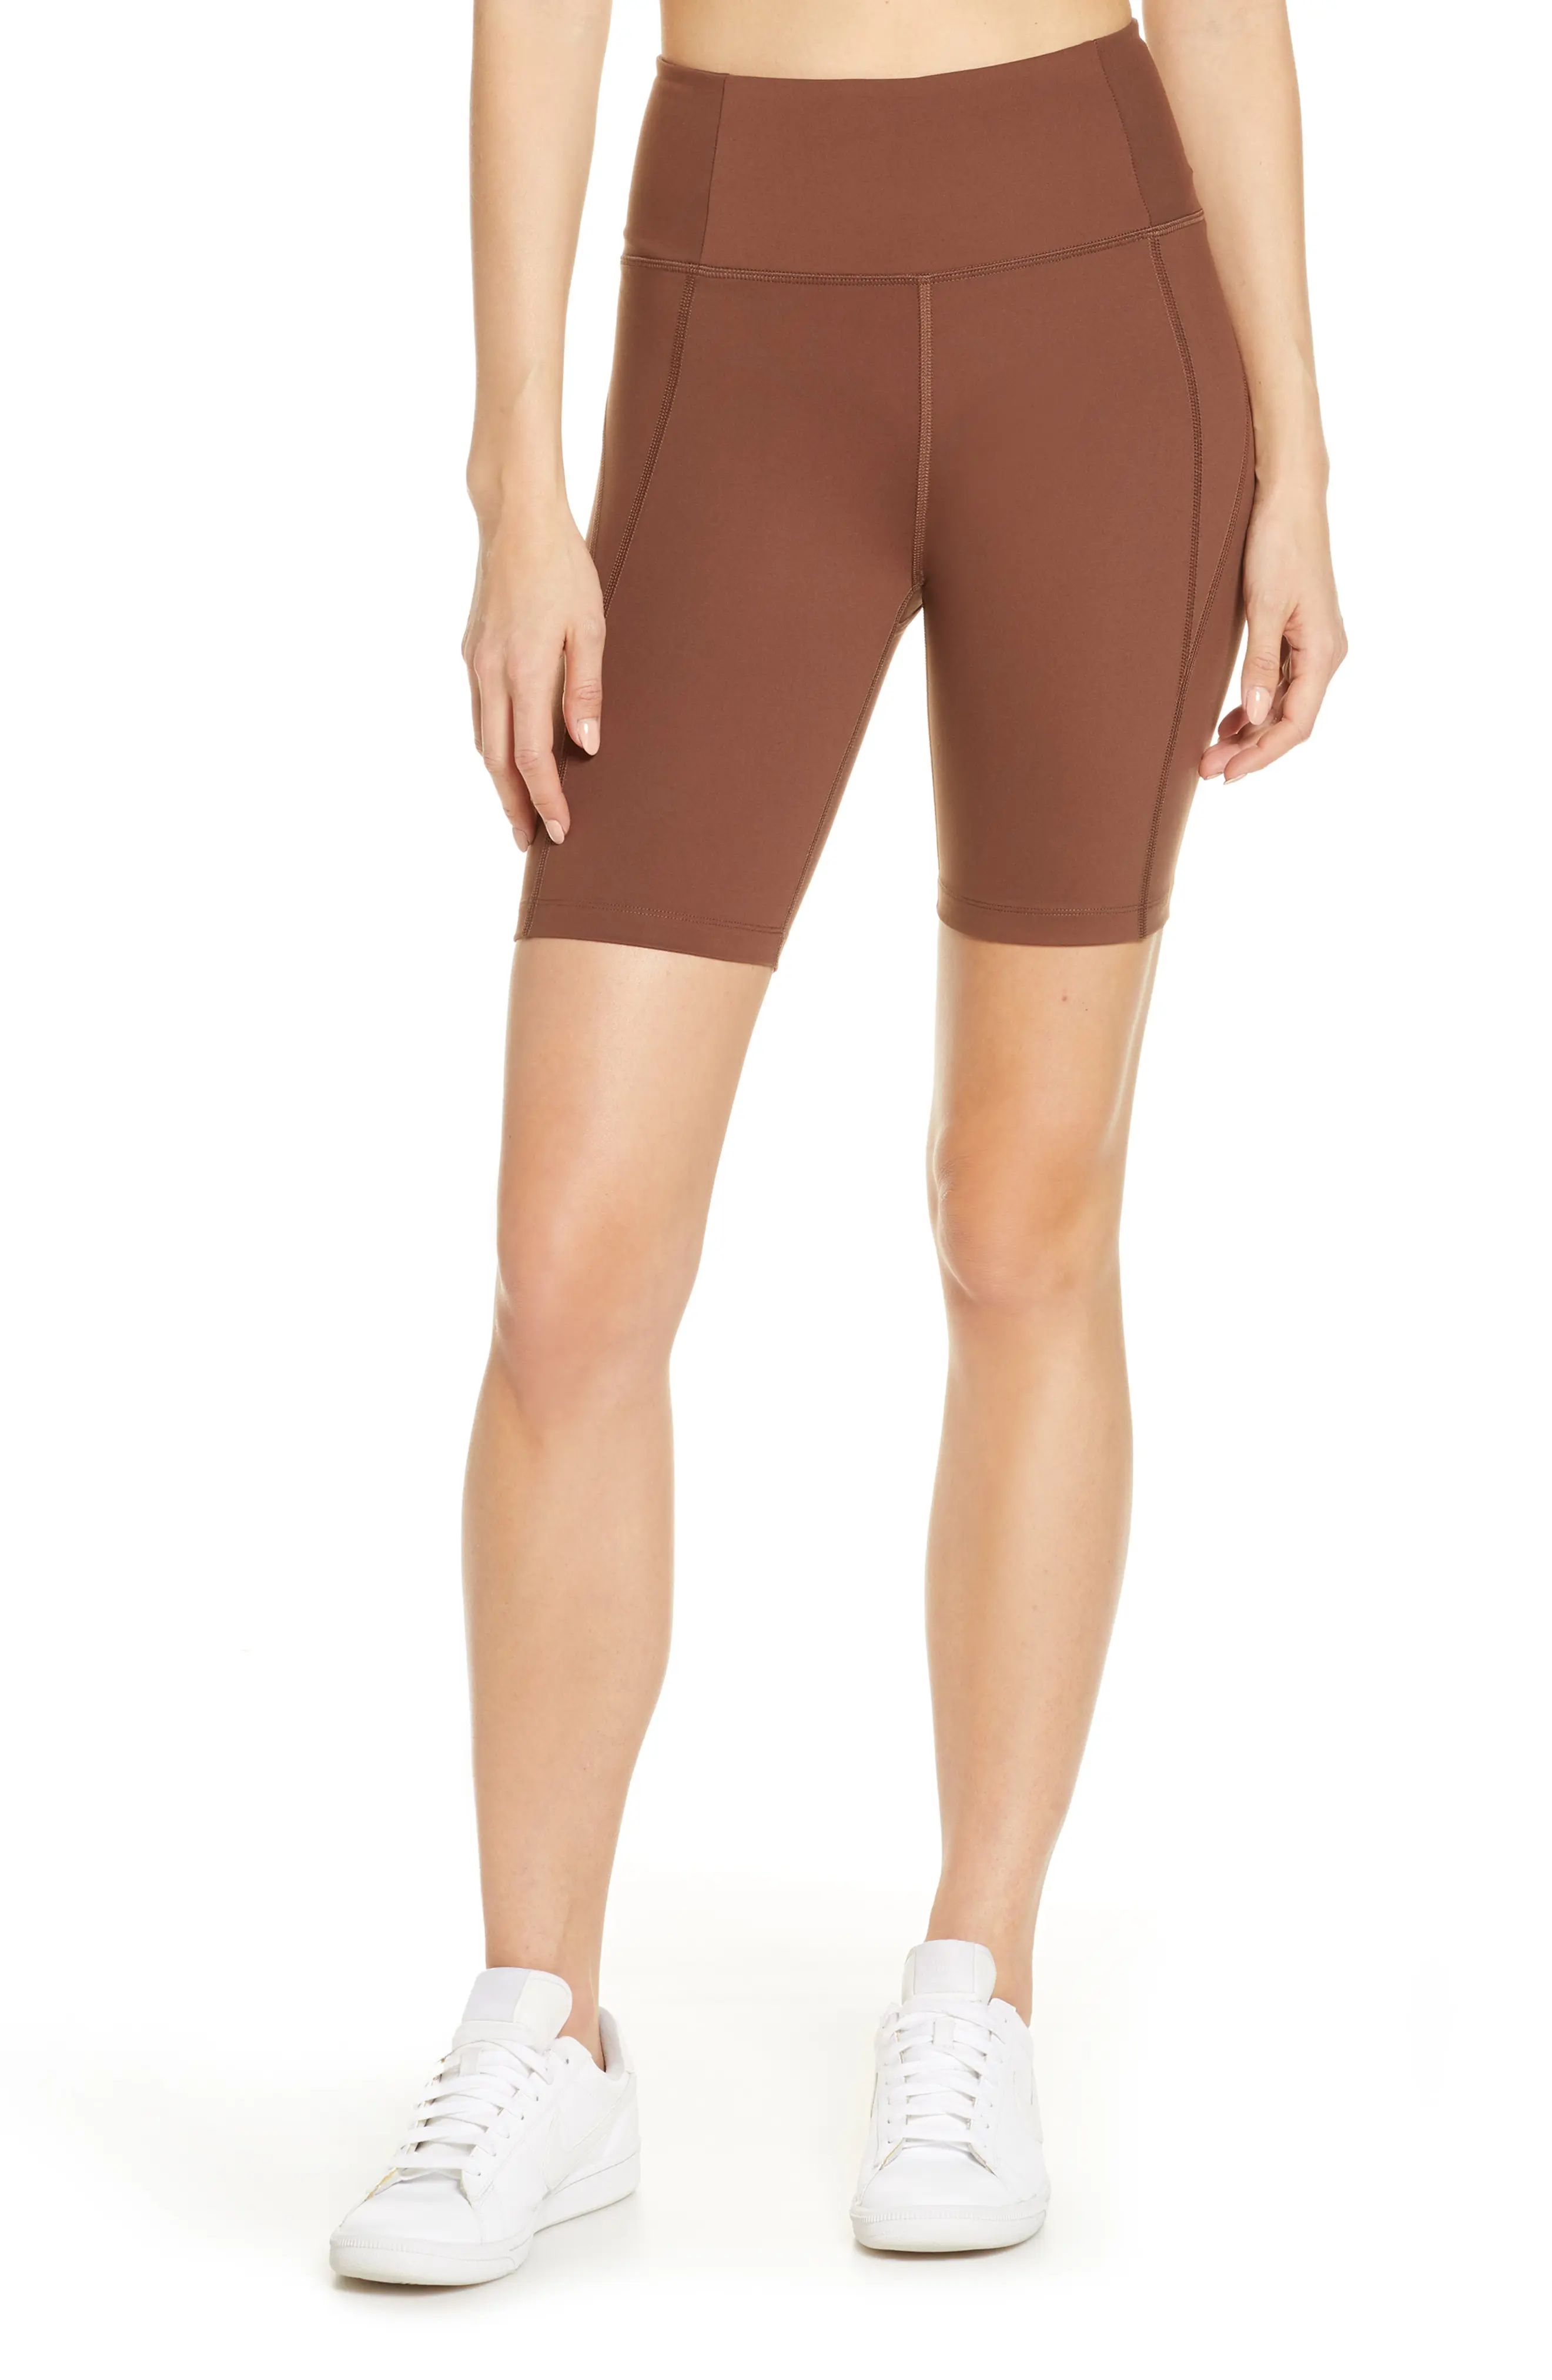 Plus Size Women's Girlfriend Collective High Waist Bike Shorts, Size 3X-Large - Brown | Nordstrom